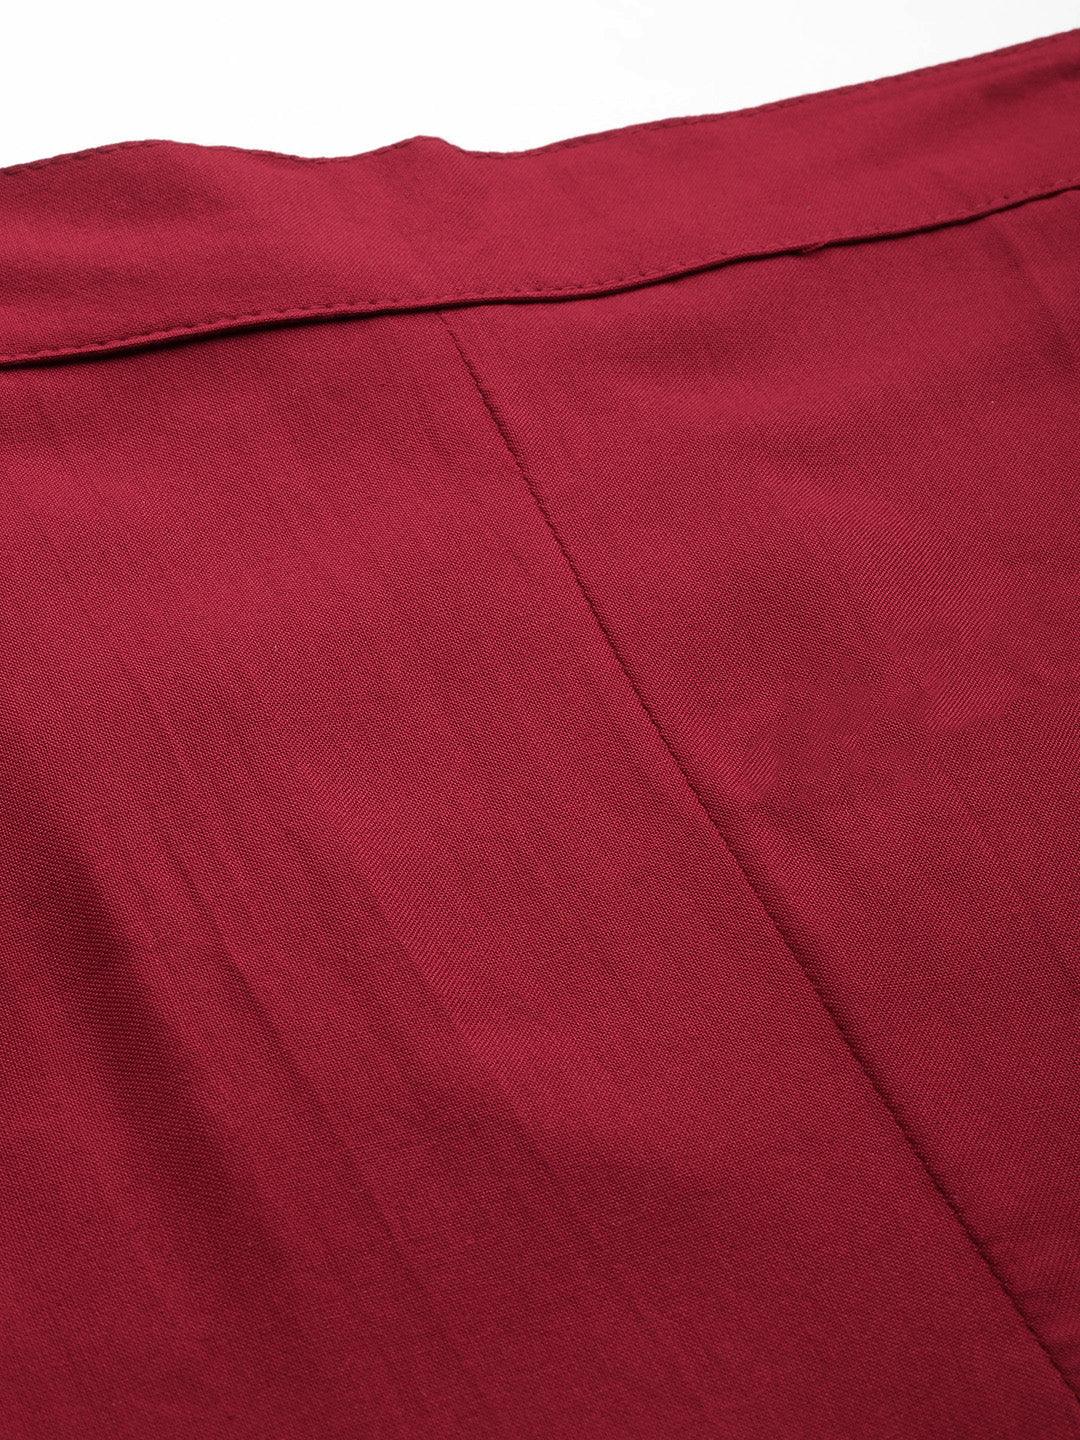 Maroon Solid Rayon Trousers